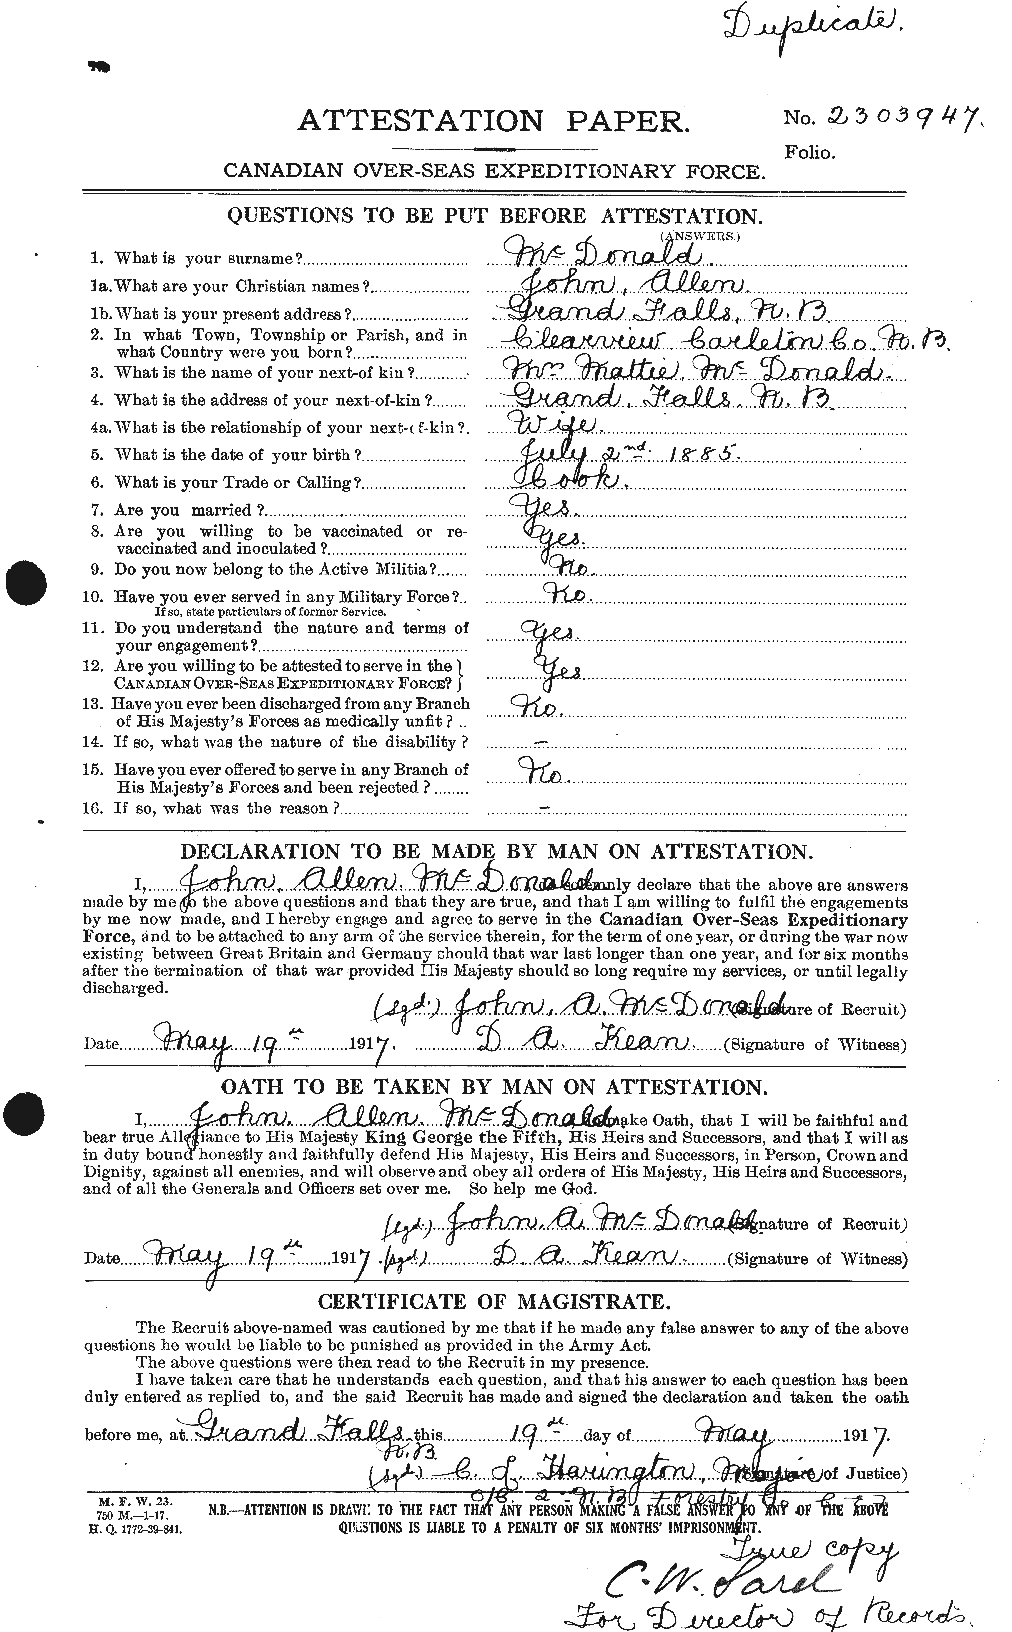 Personnel Records of the First World War - CEF 516521a